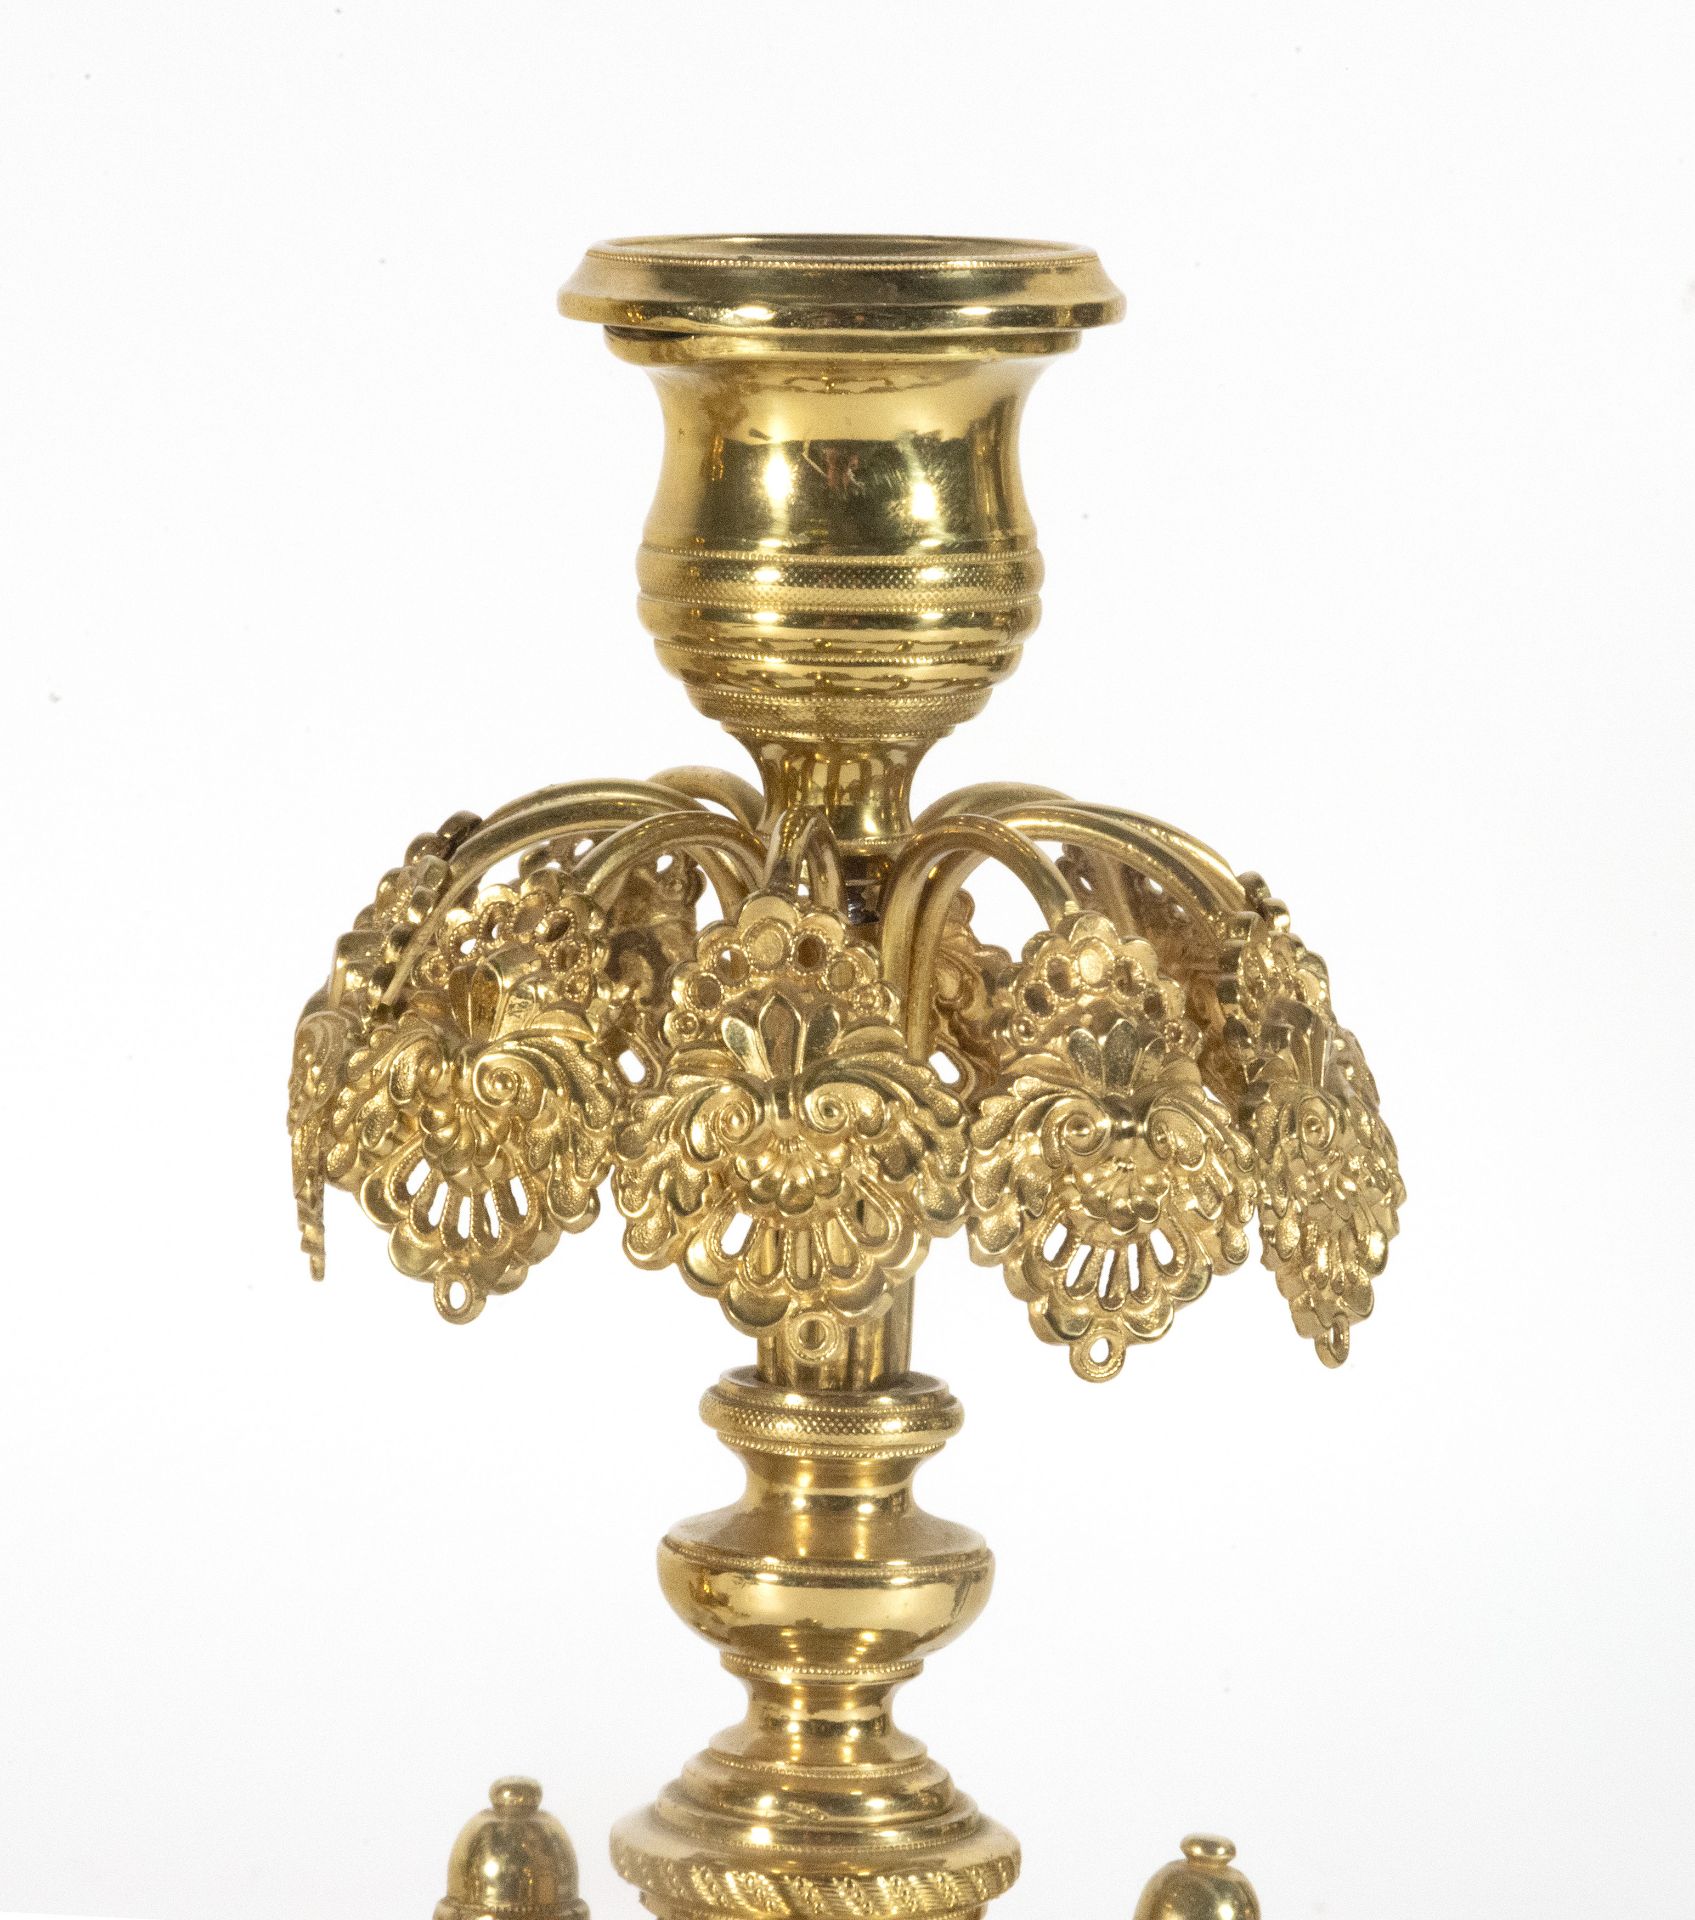 Pair of Victorian English rotating gilt bronze candelabras, 19th century - Image 2 of 3